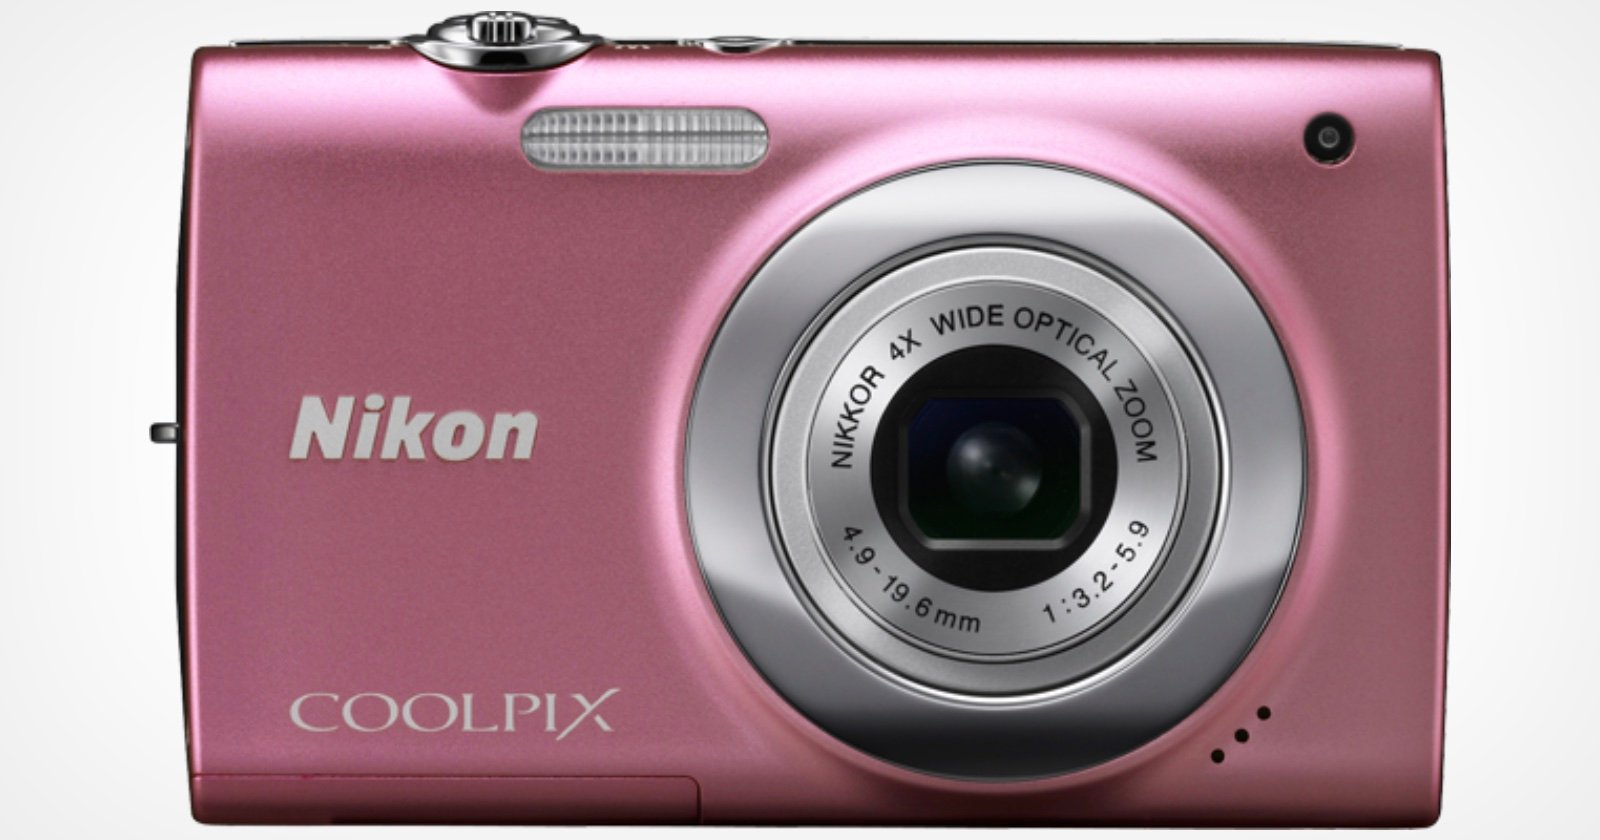 Google Searches For Nikon Coolpix Camera Increase By Over 8,500%